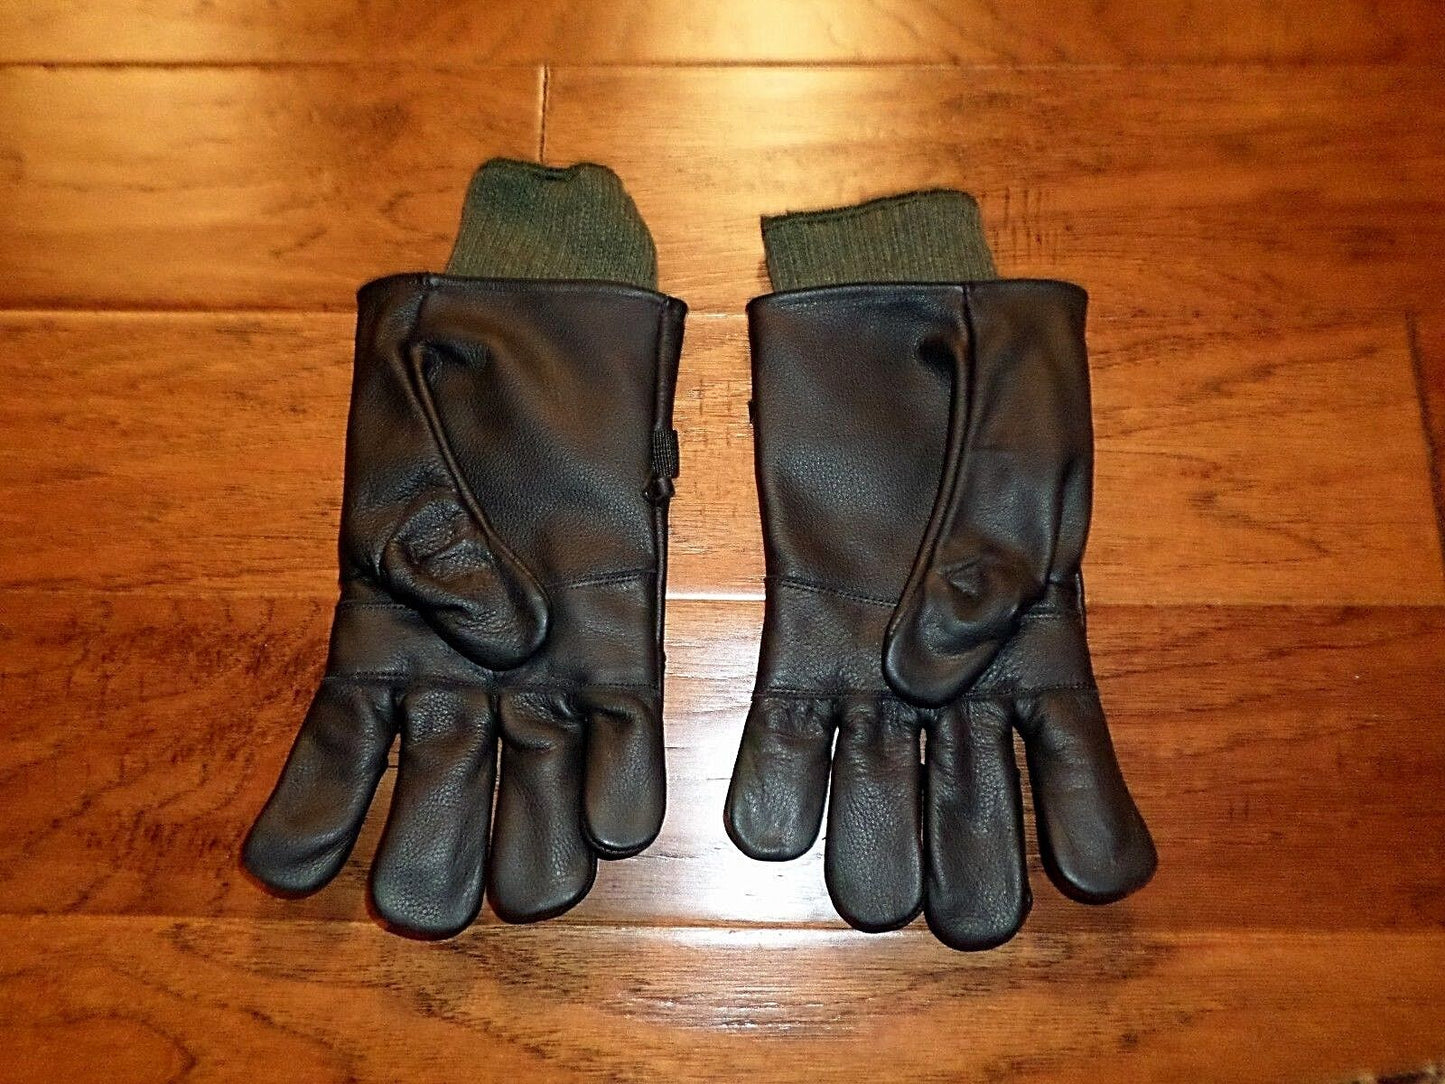 U.S MILITARY STYLE D-3A LEATHER GLOVES COLD WET WEATHER SIZE 5 LARGE W/LINER